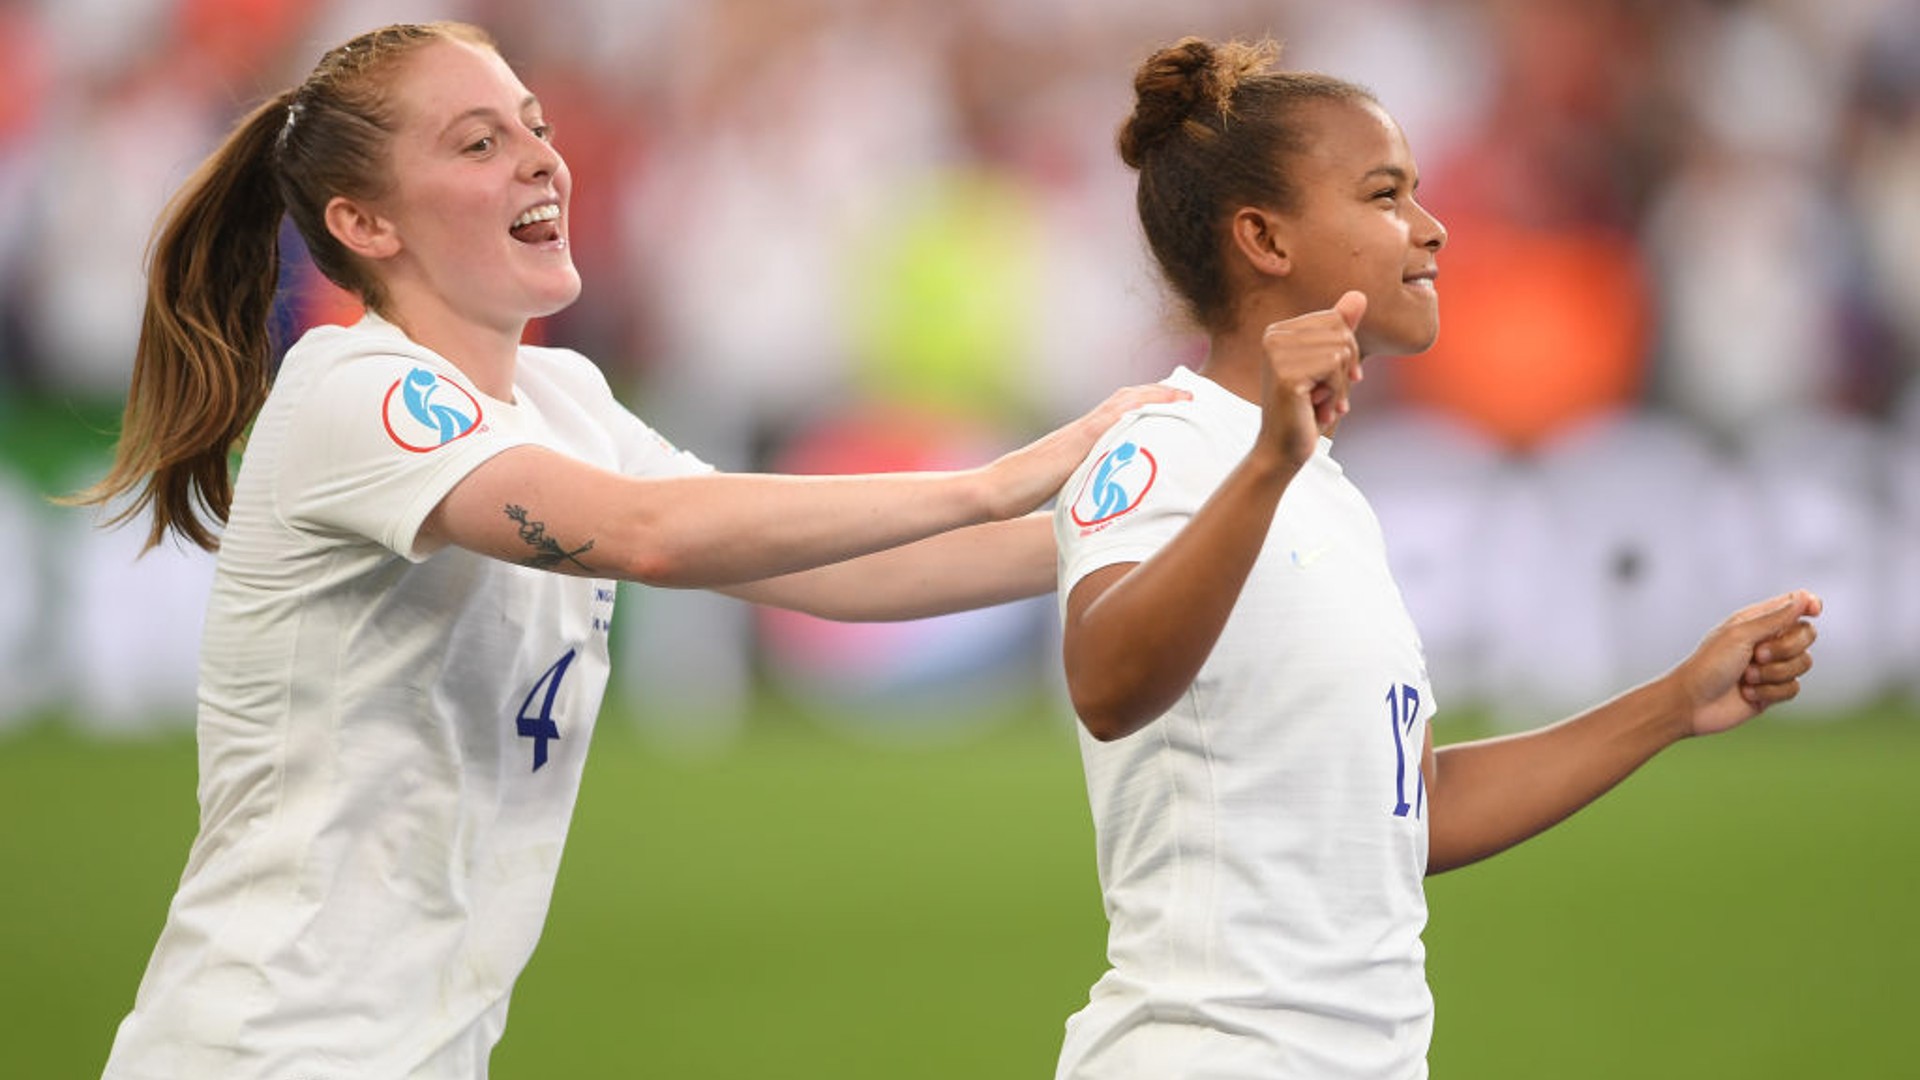 Lionesses will look to build on EURO 2022 glory, says Walsh